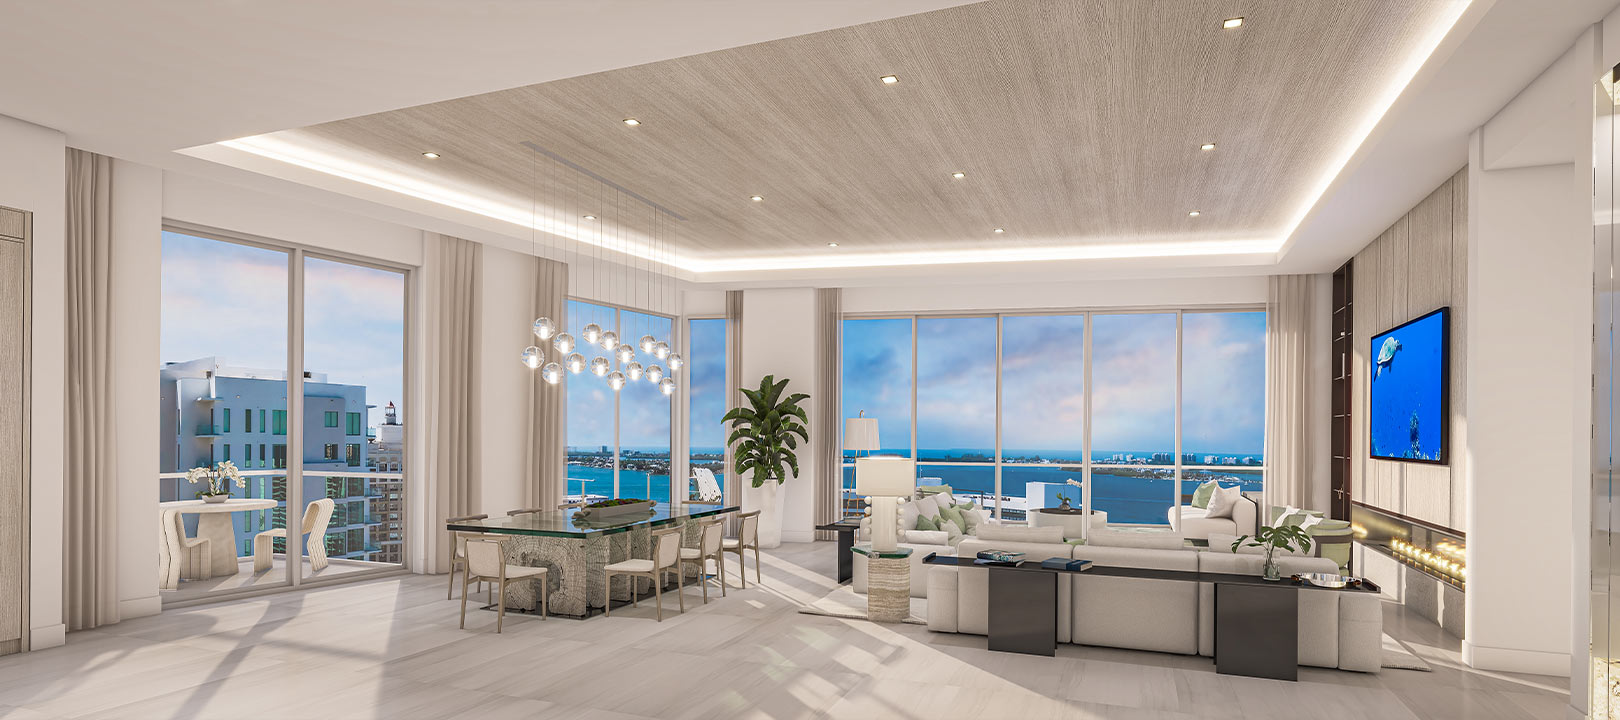 EState Penthouse G Great Room Rendering